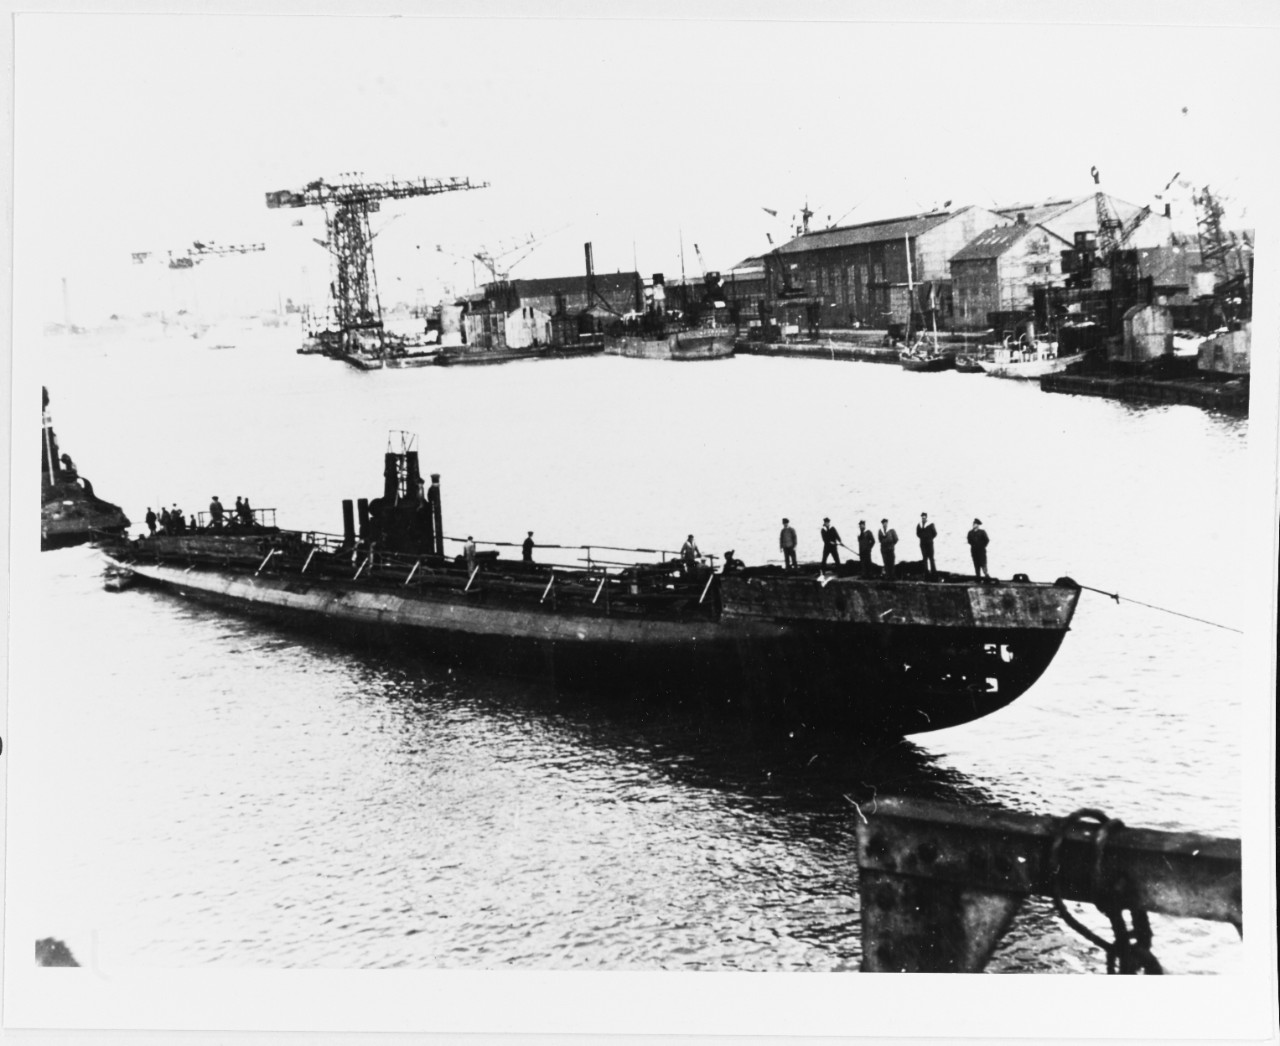 French submarine just after launching, circa 1930.